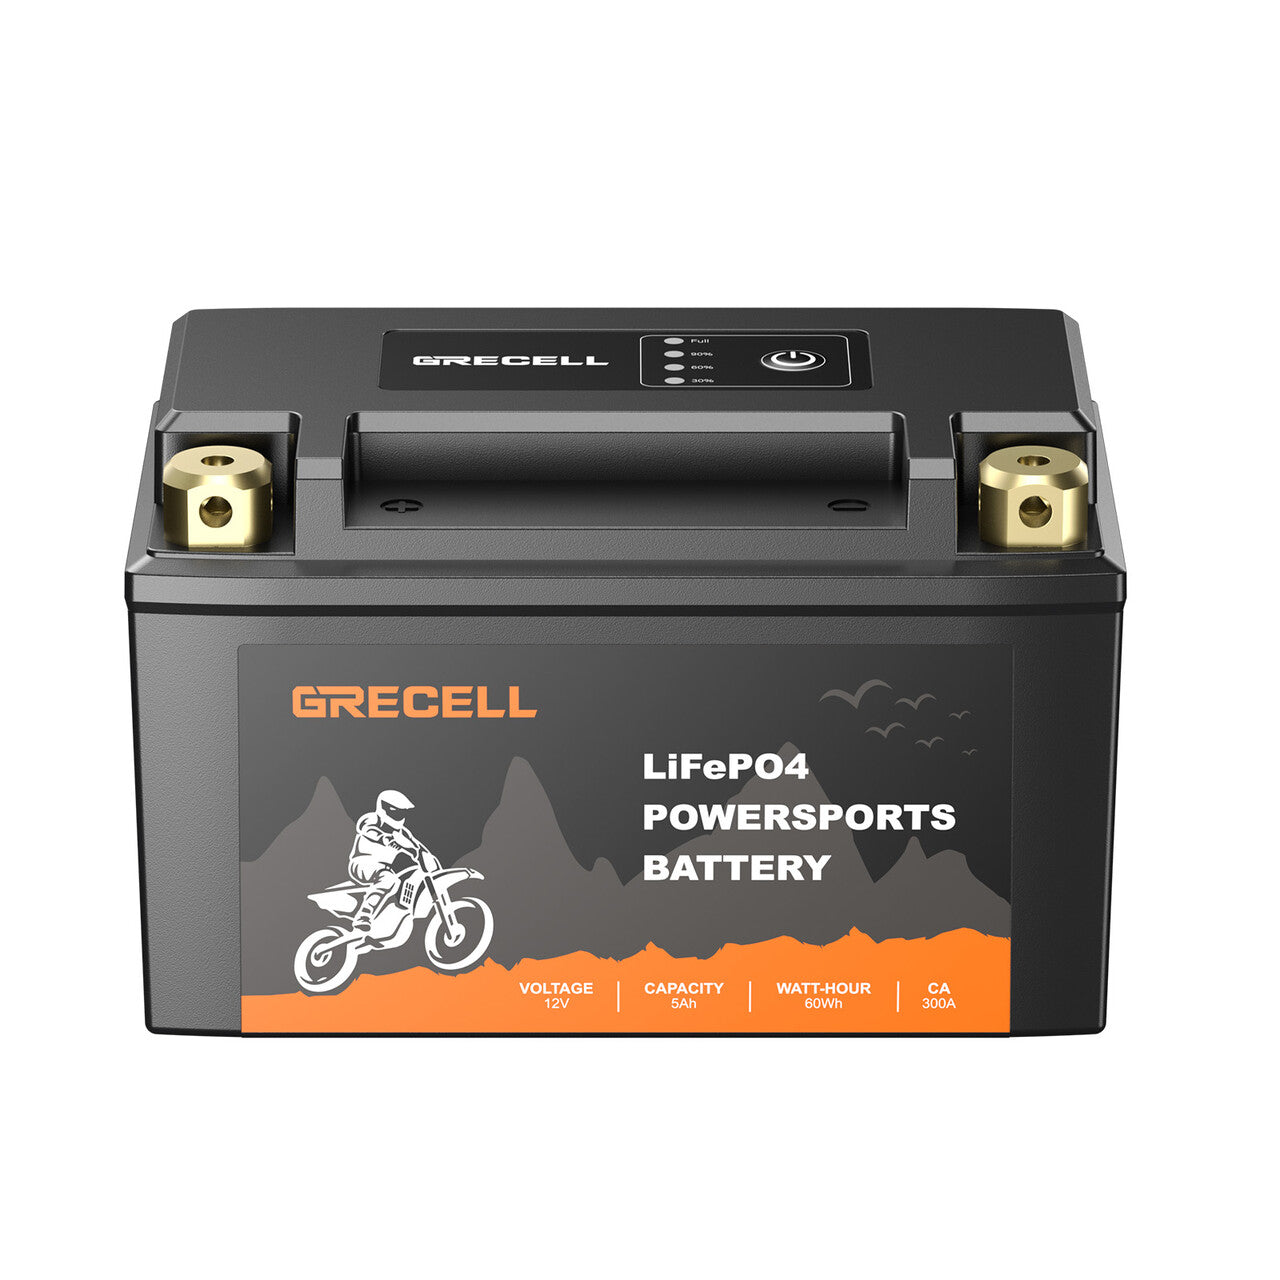 GRECELL Lithium 12V 5Ah Motorcycle LiFePO4 Battery